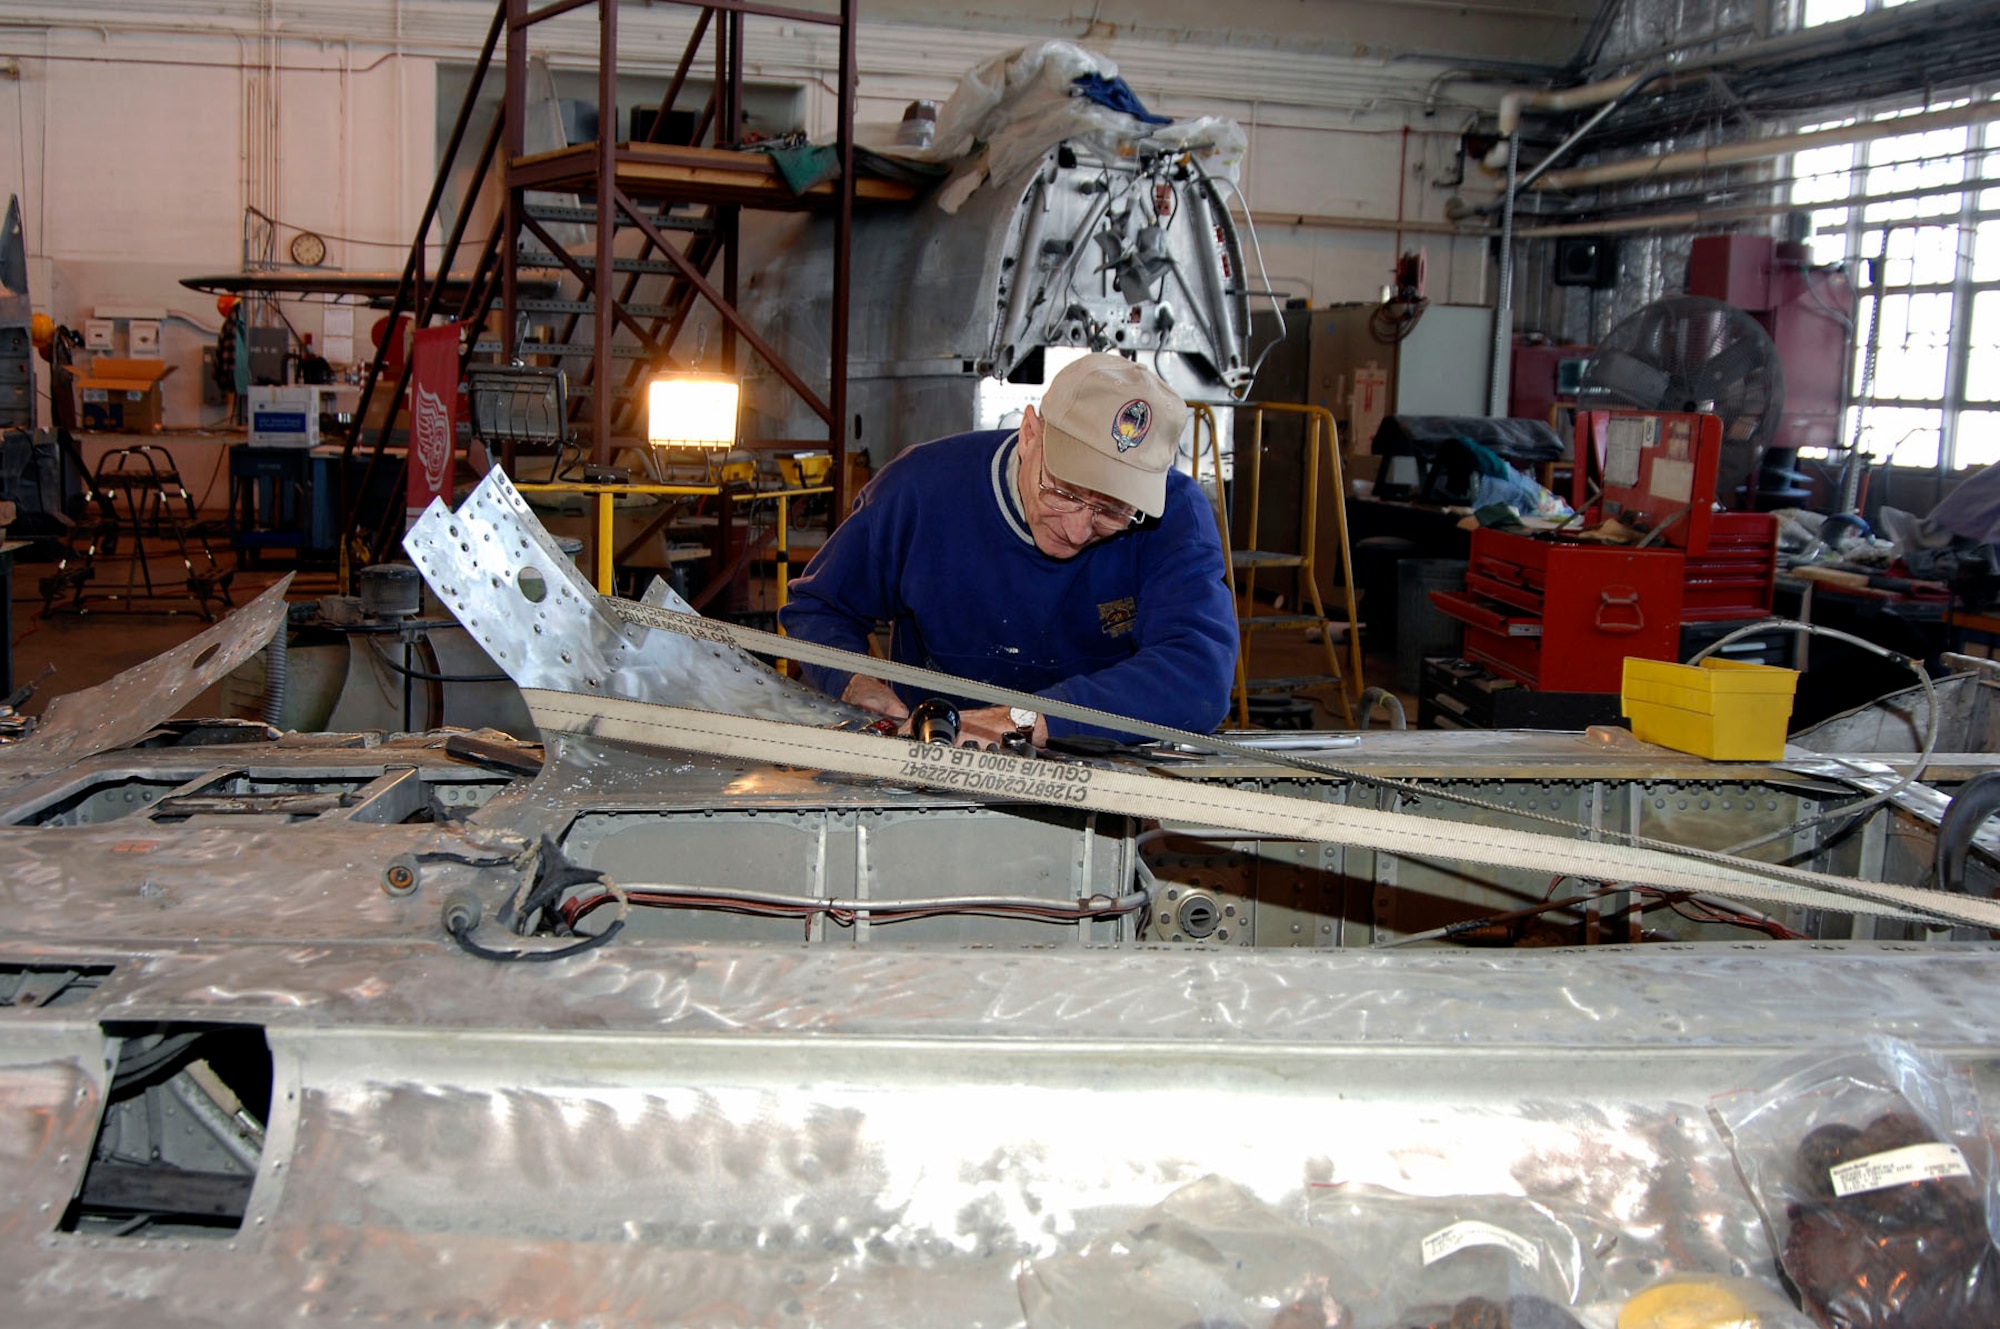 DAYTON, Ohio (02/2007) -- Volunteer Leroy Hendrickson works on the Japanese George aircraft wing in the restoration hangar at the National Museum of the U.S. Air Force. (U.S. Air Force photo)